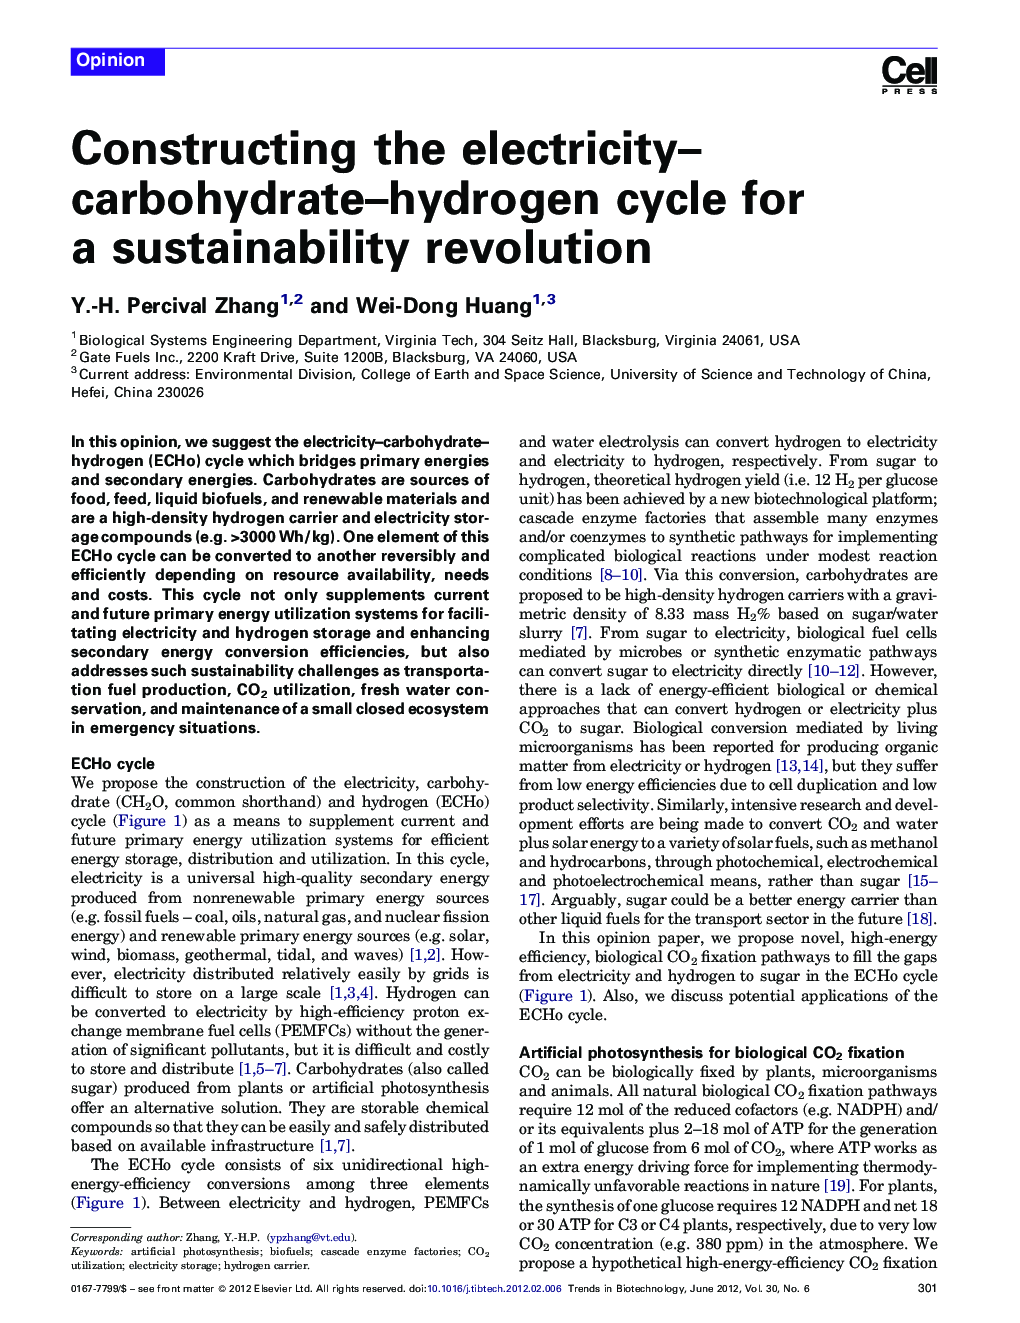 Constructing the electricity–carbohydrate–hydrogen cycle for a sustainability revolution